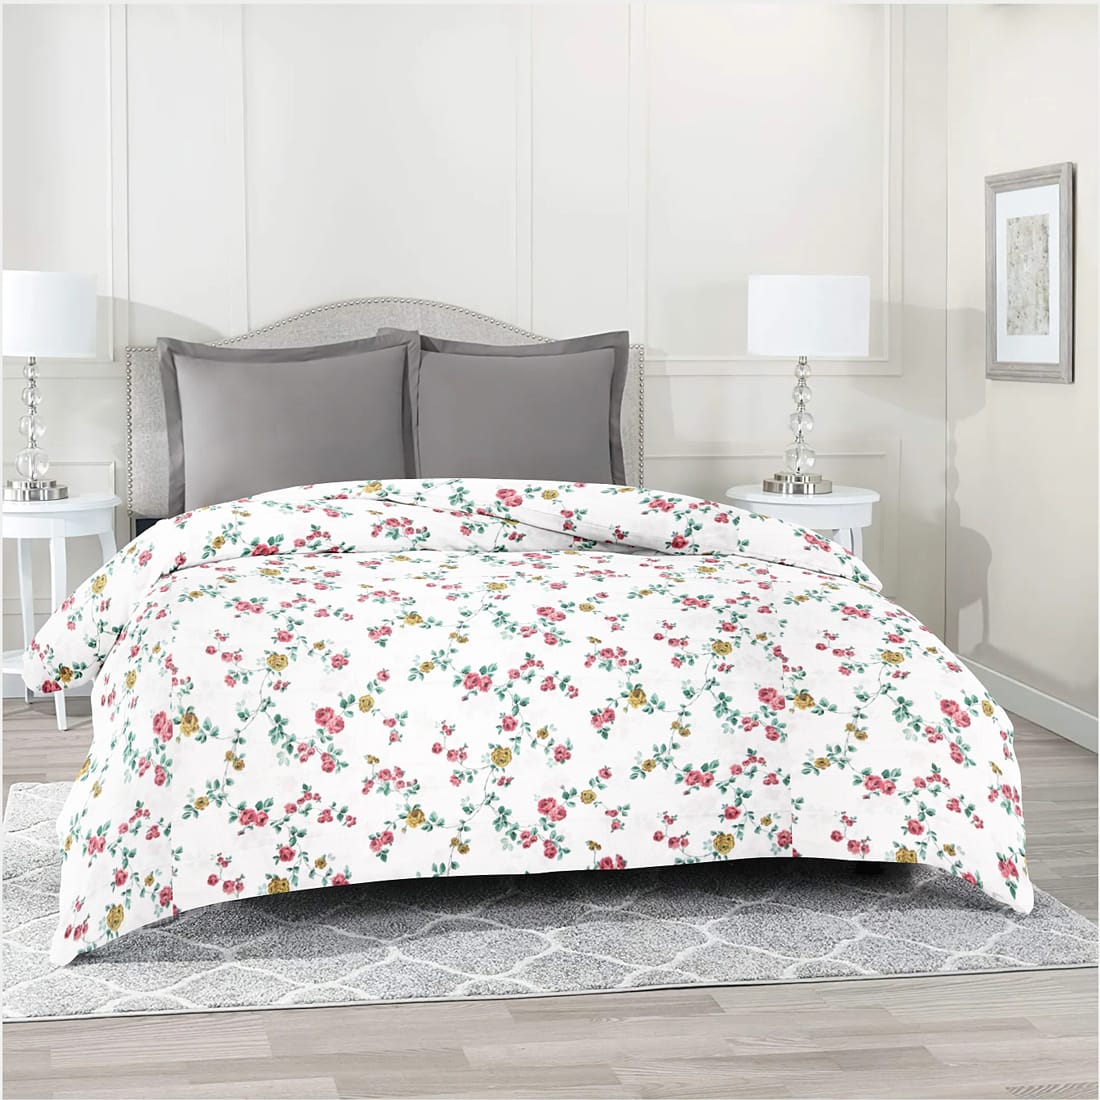 Comfy 250 TC Red Floral Print Cotton Duvet Cover online in India